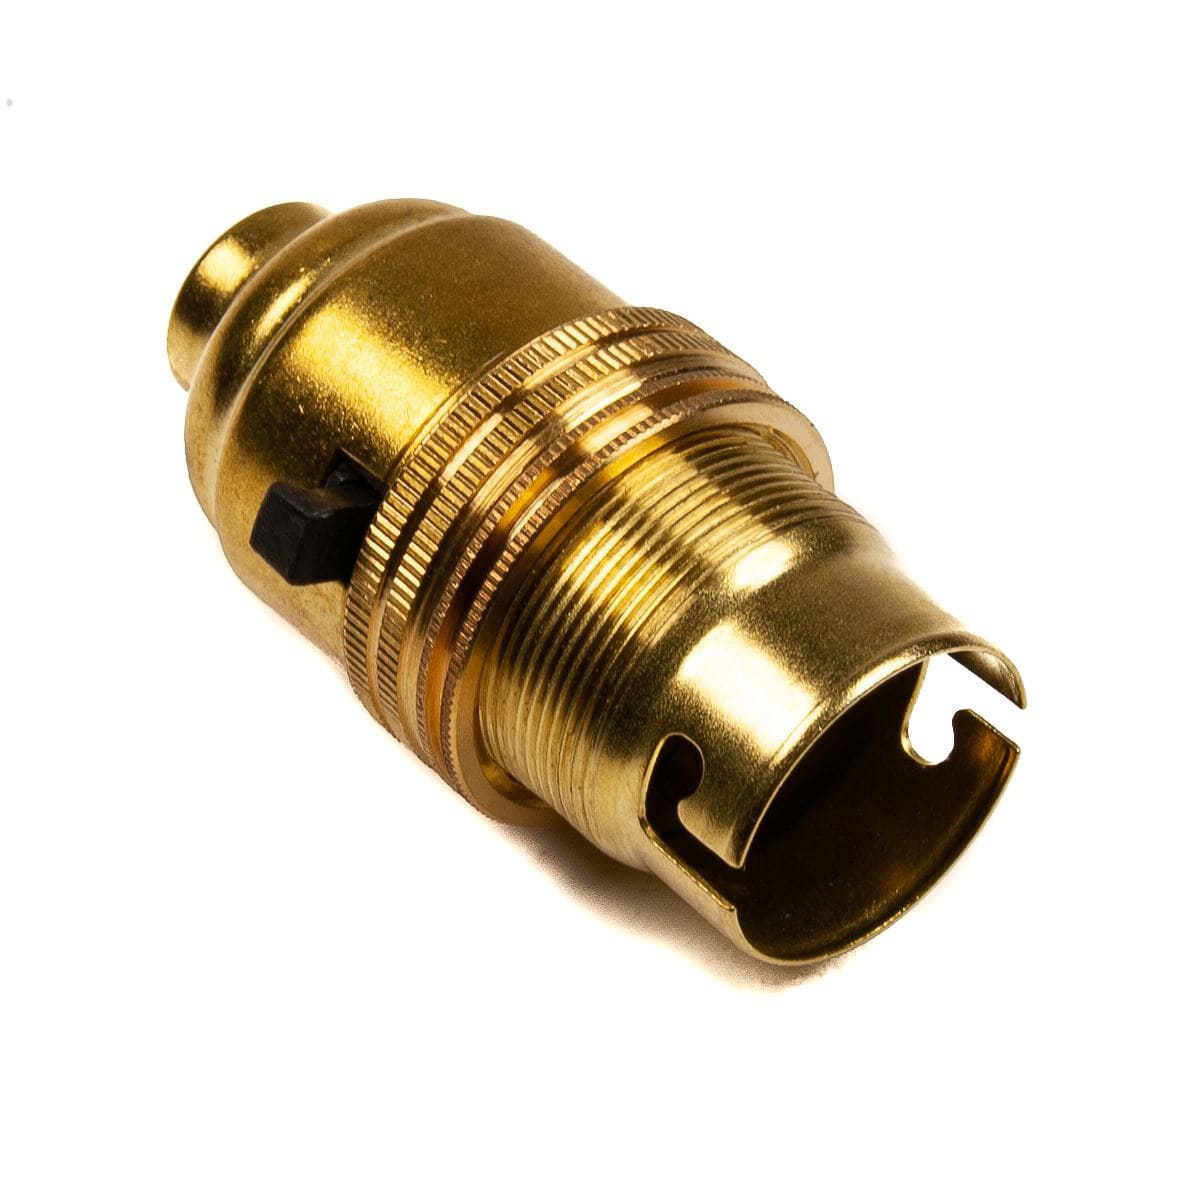 Switched Lamp Holder Brass Bayonet Cap (BC) (B22d) 10mm Screw Thread Switched Lampholders Thunderfix 100585